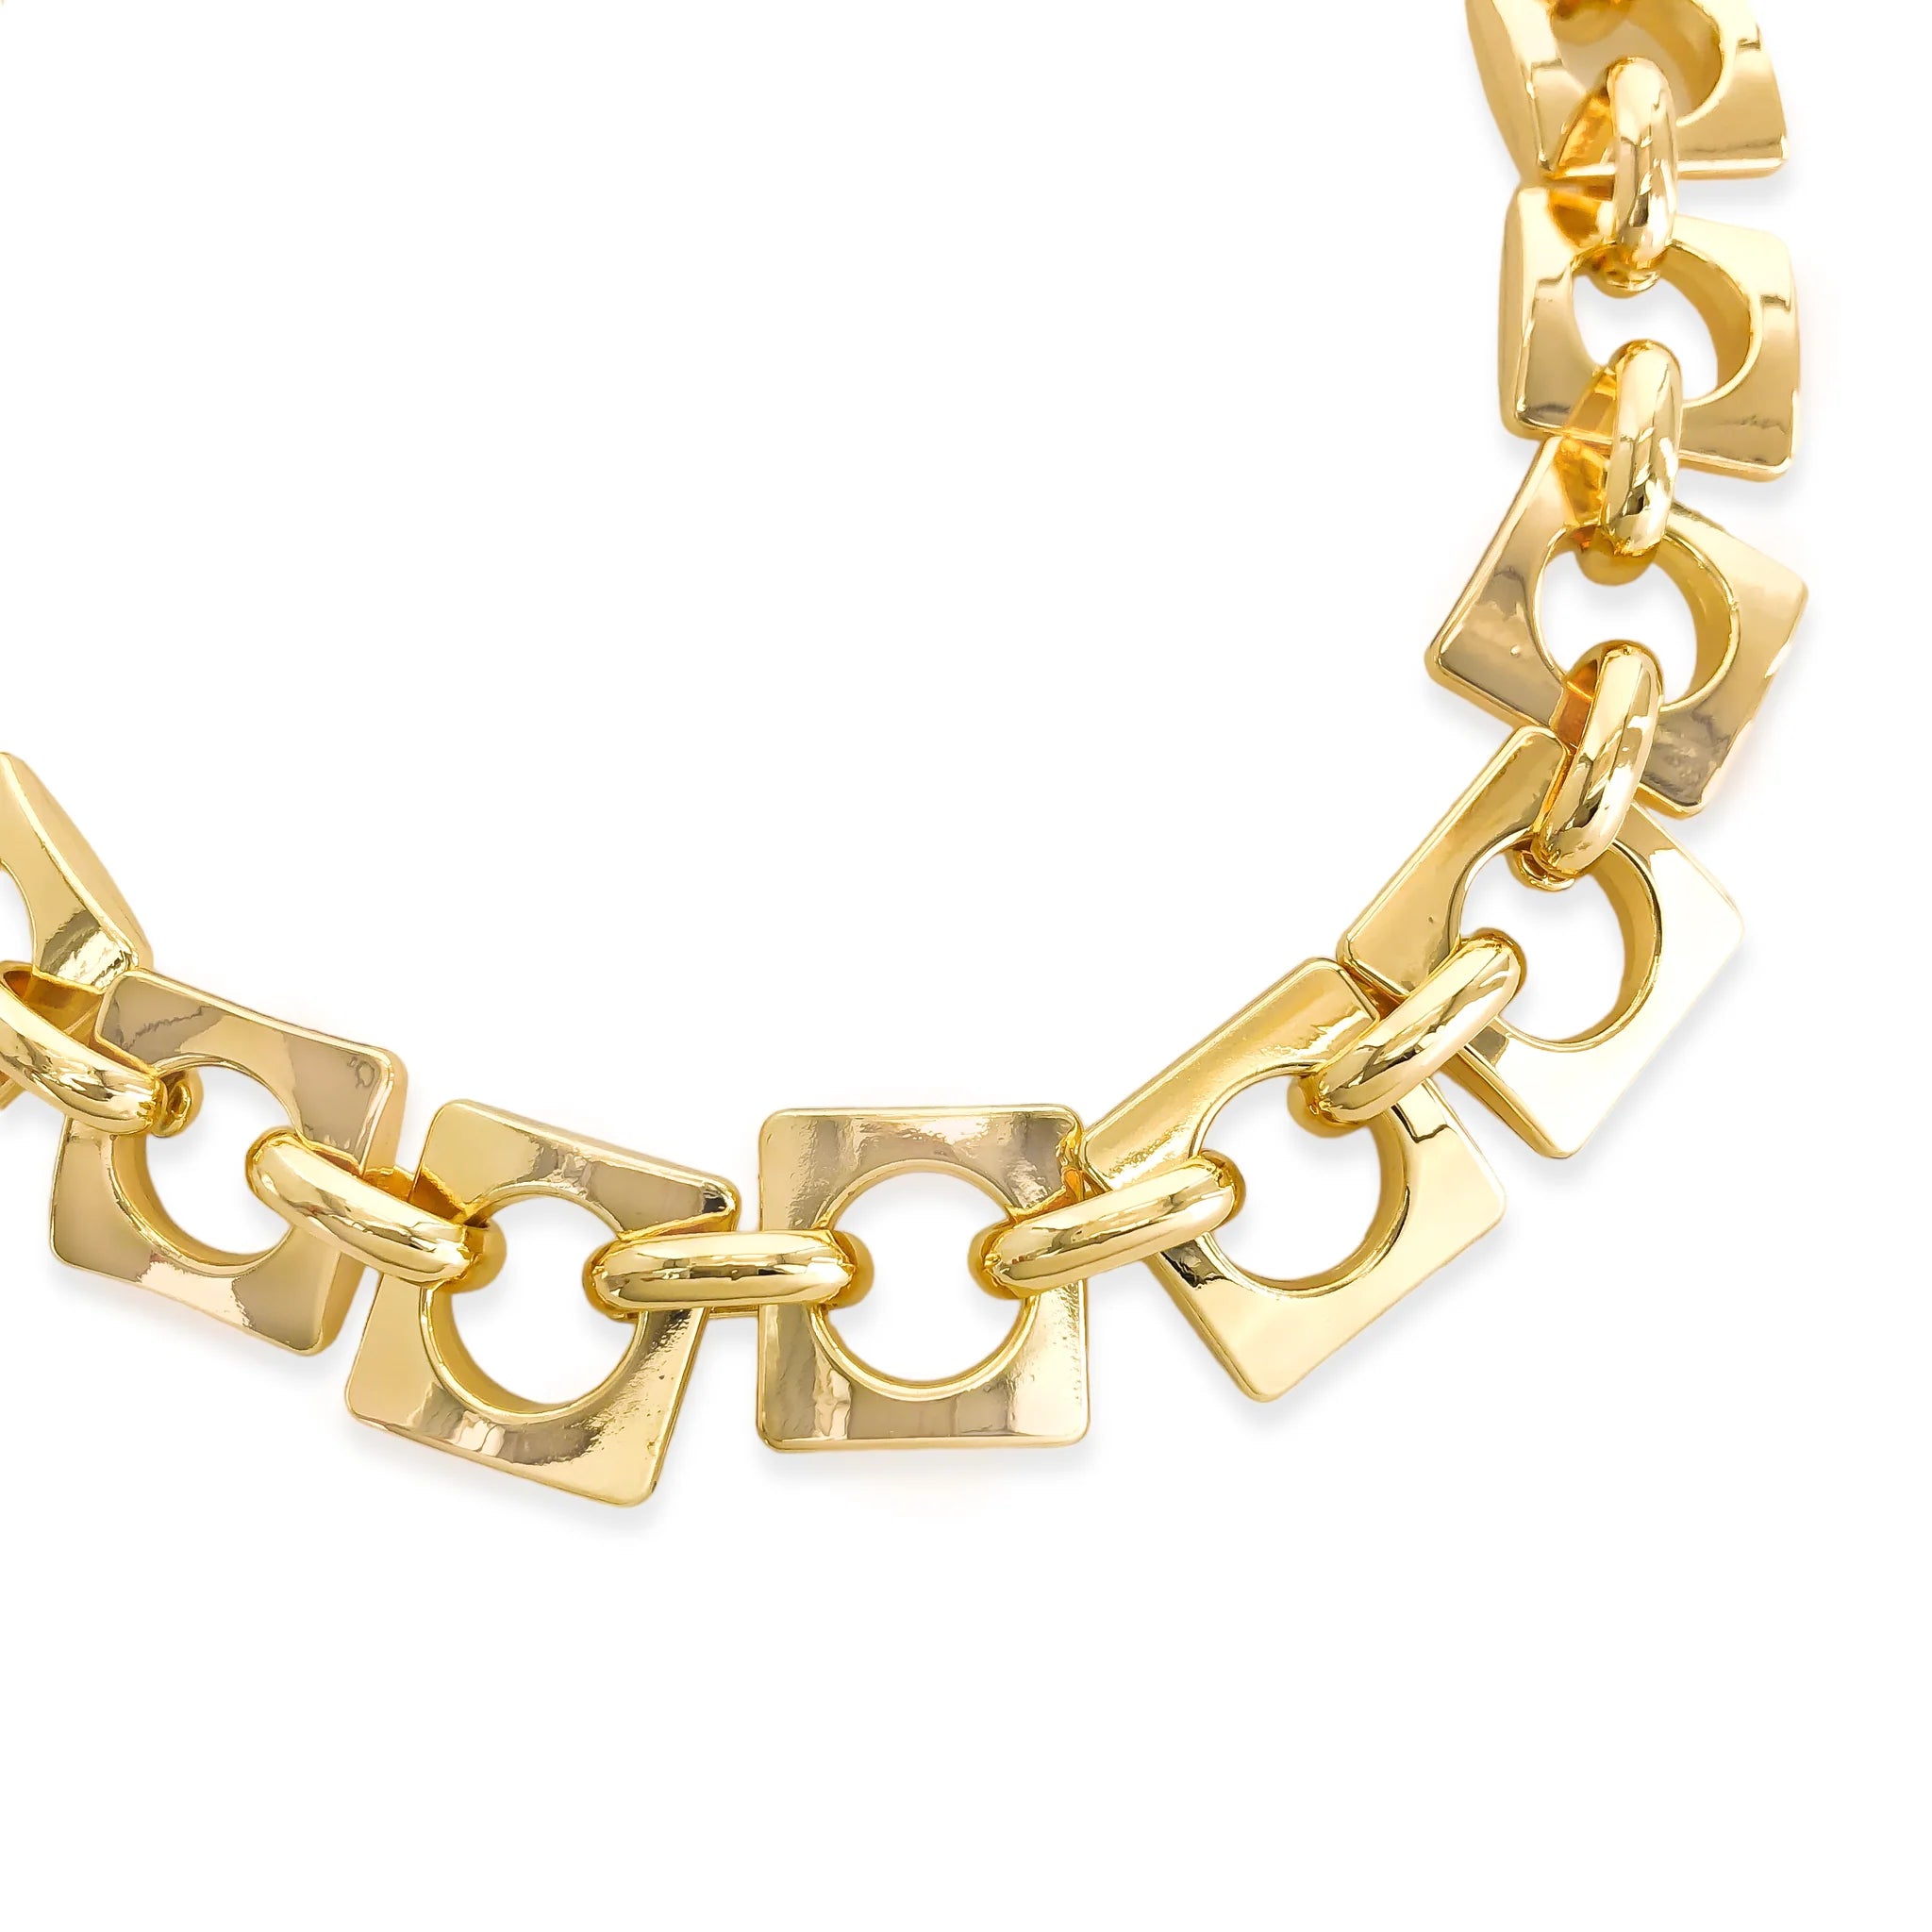 ANK501 - Square Chain Necklace